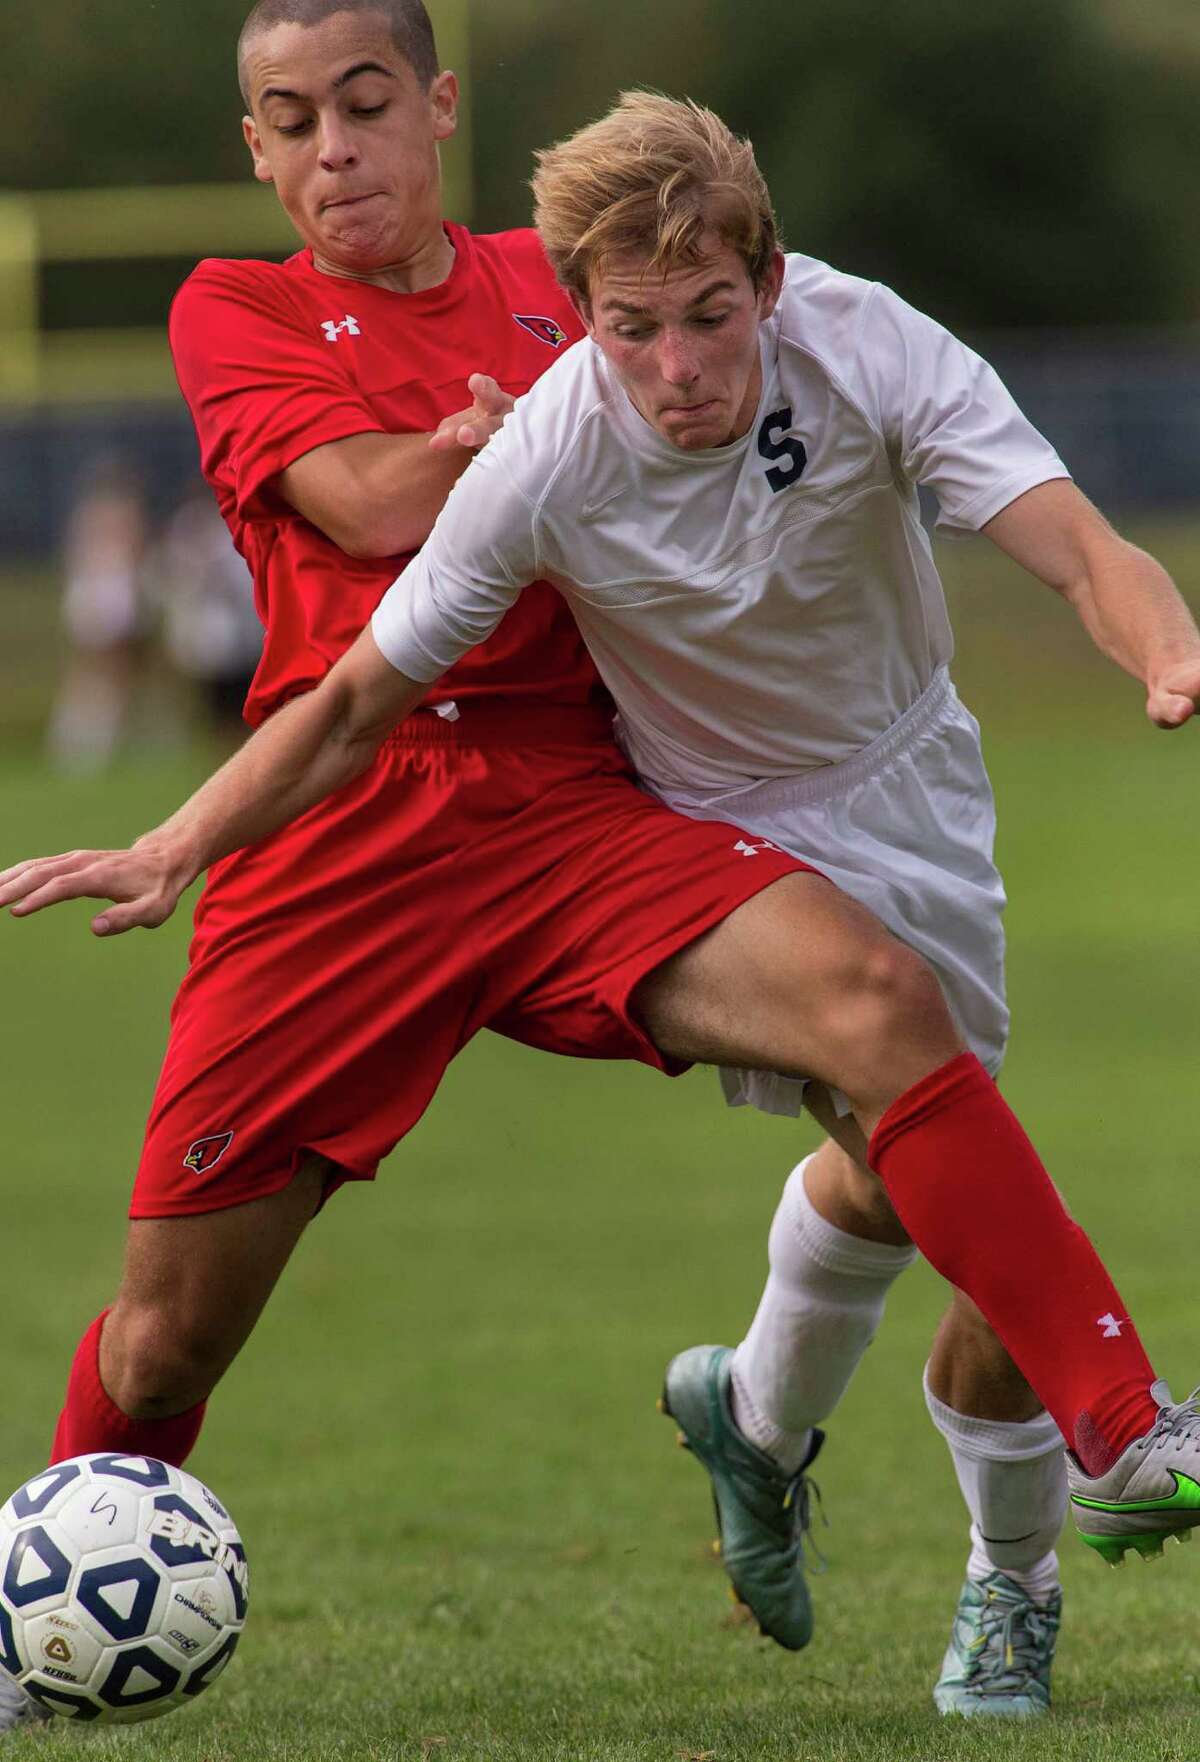 Greenwich’s Luis Carrillo and Staples’ Spencer Daniels battle for the ball during a boys soccer game played at Staples High School, Westport, CT on Tuesday, September 22, 2015.